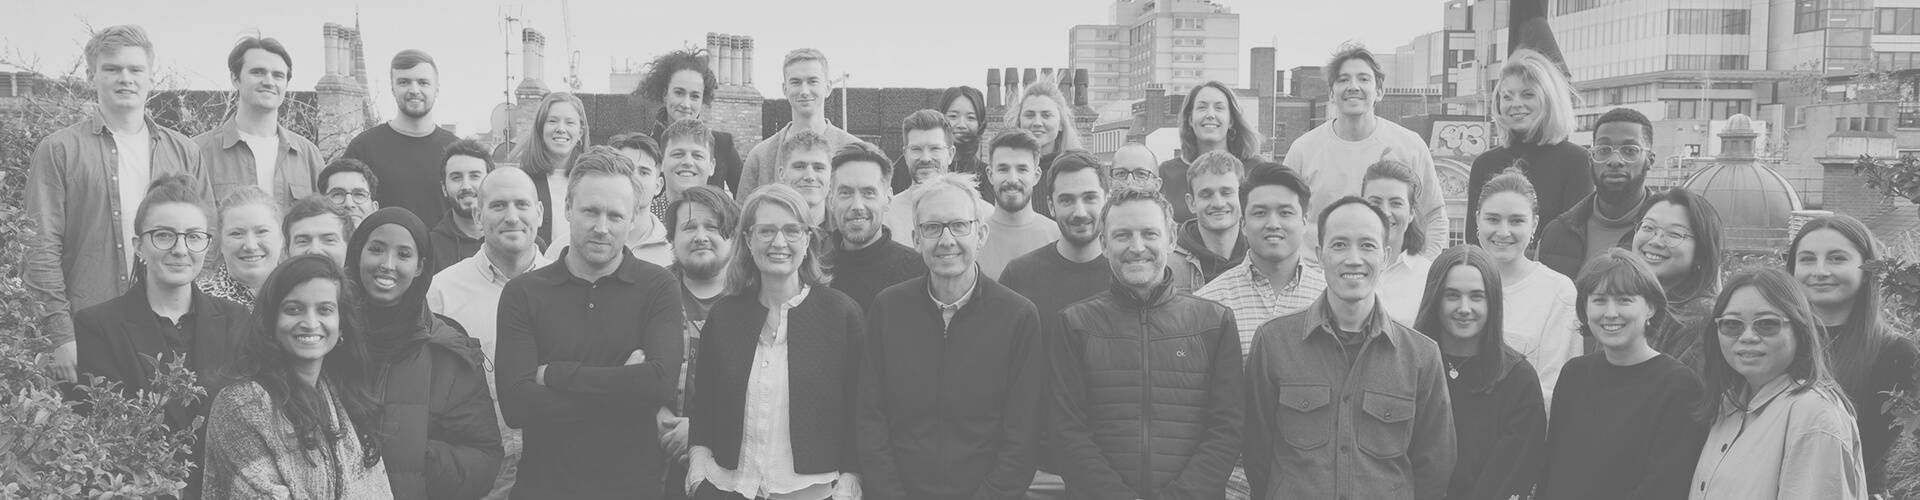 The PriestmanGoode team on the rooftop of the studio's London headquarters in 2022